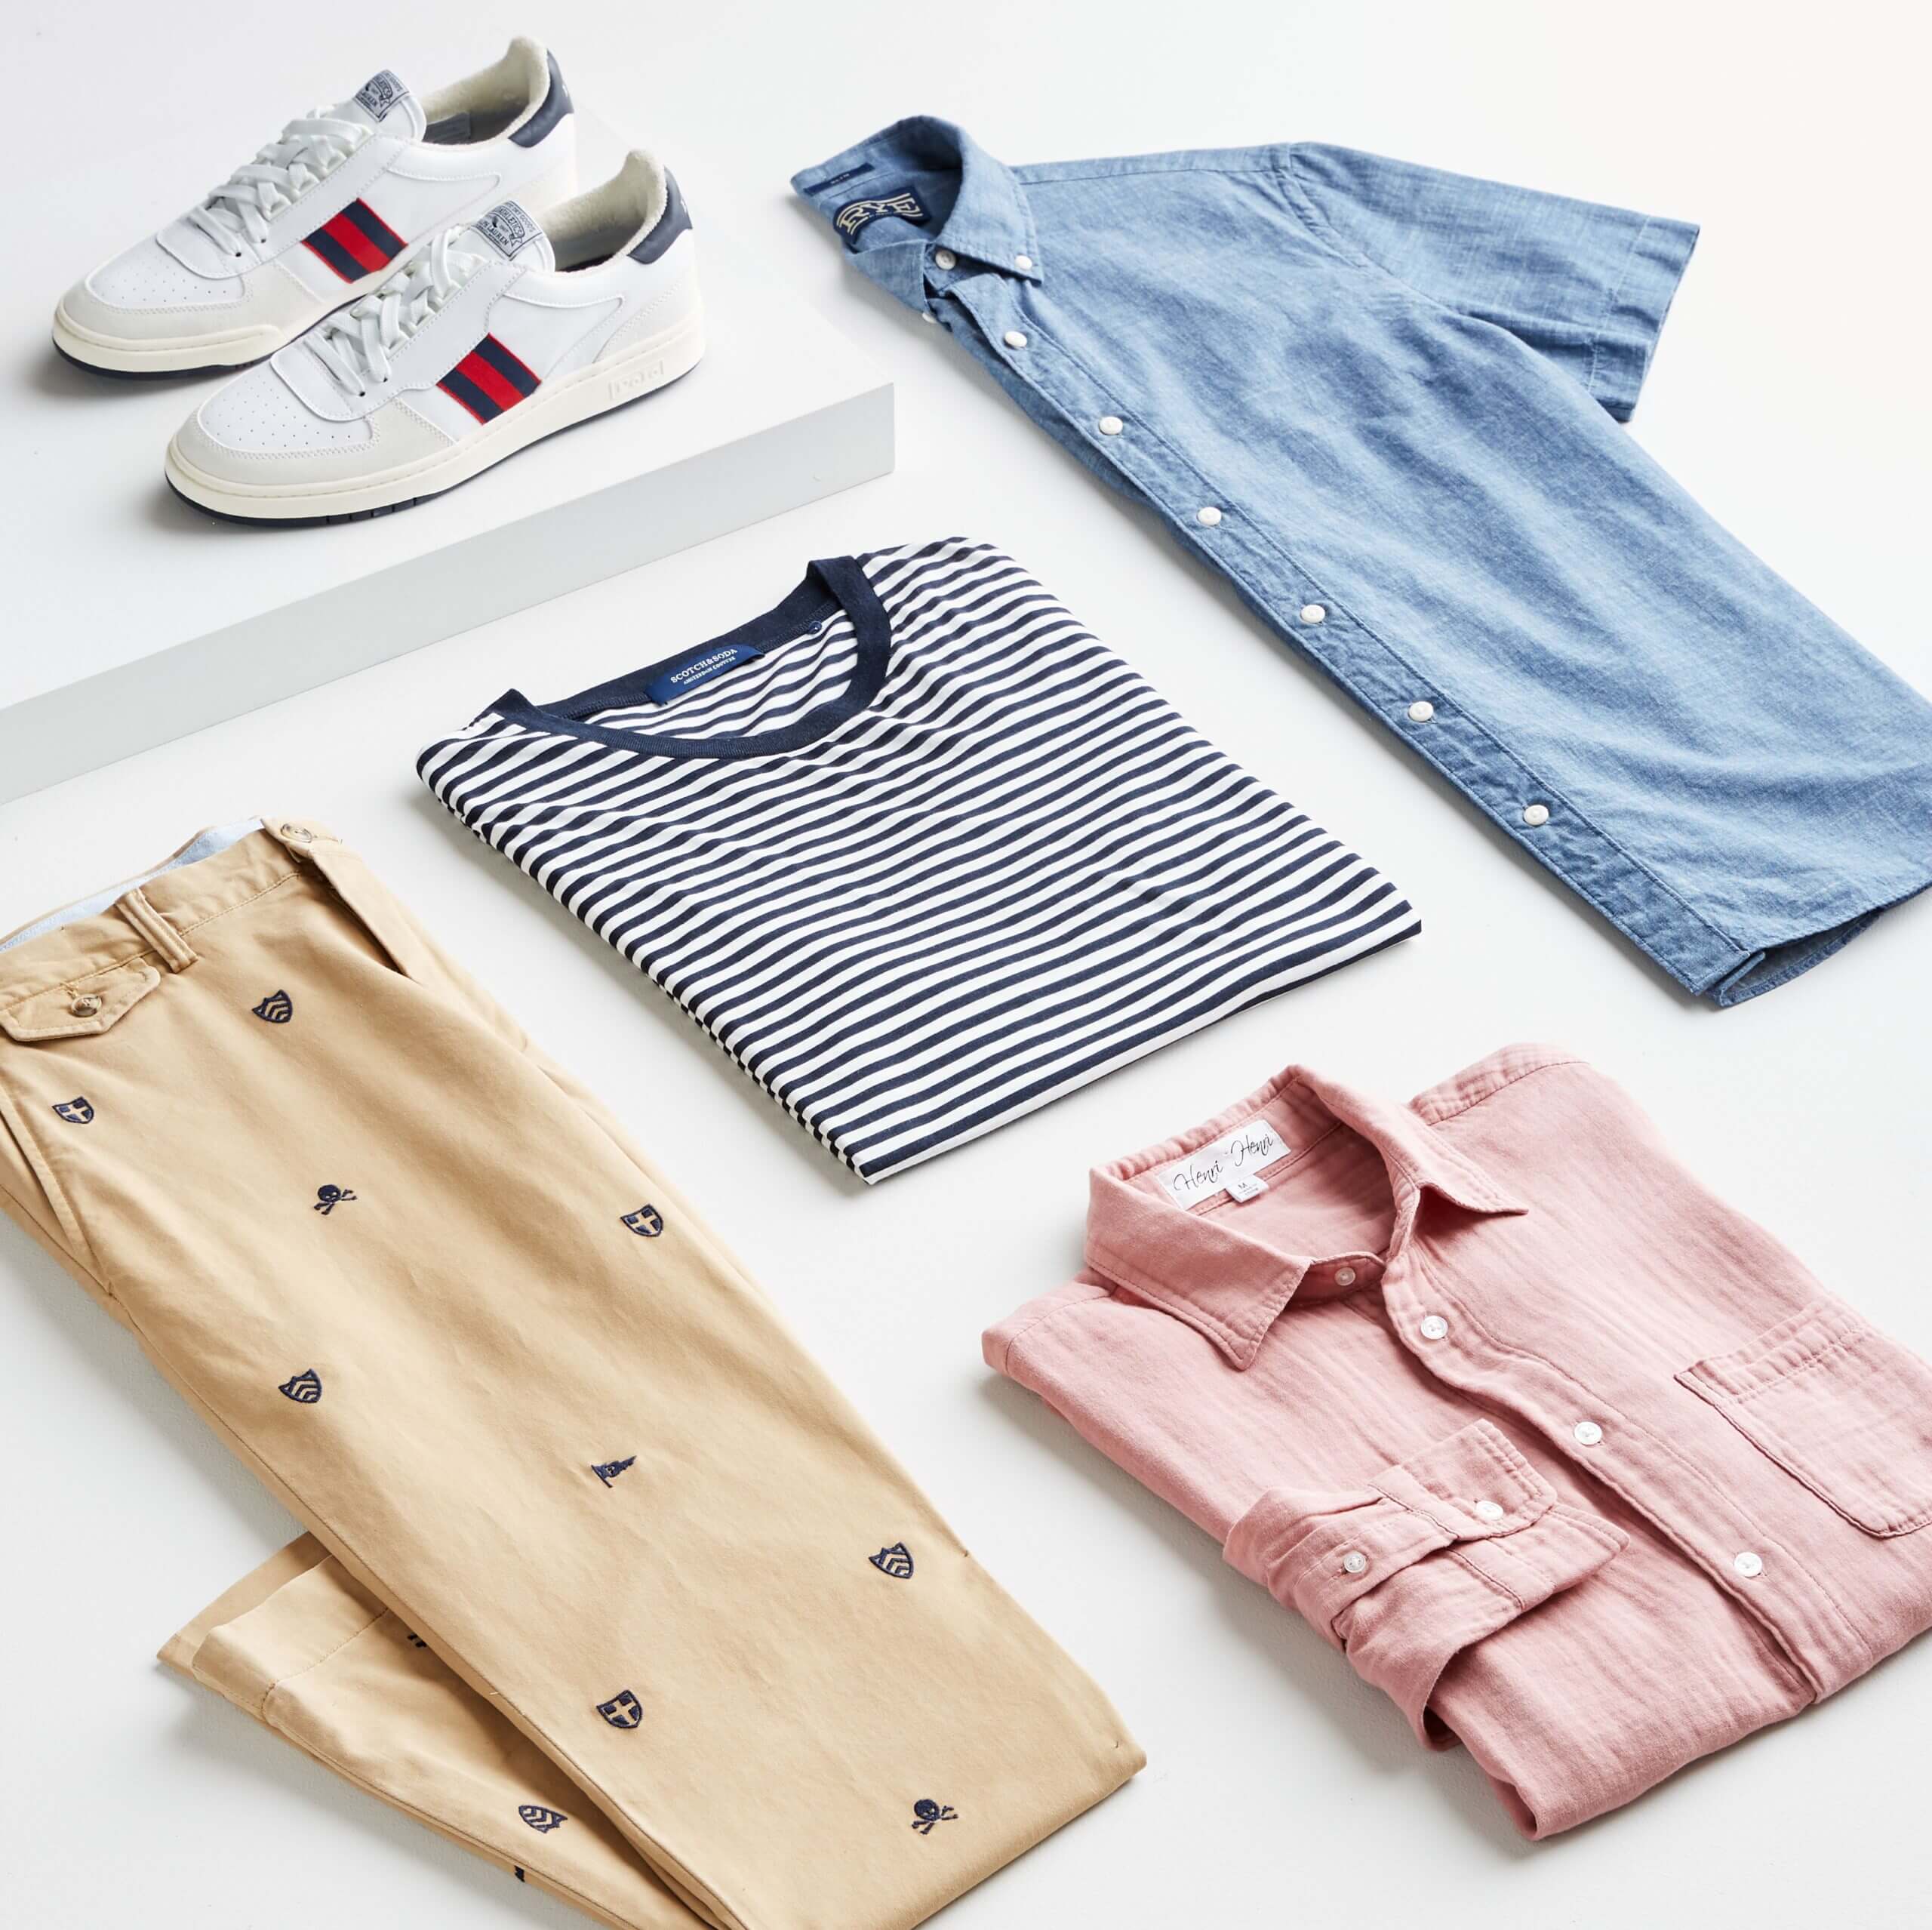 Preppy Style for Men, Personal Styling